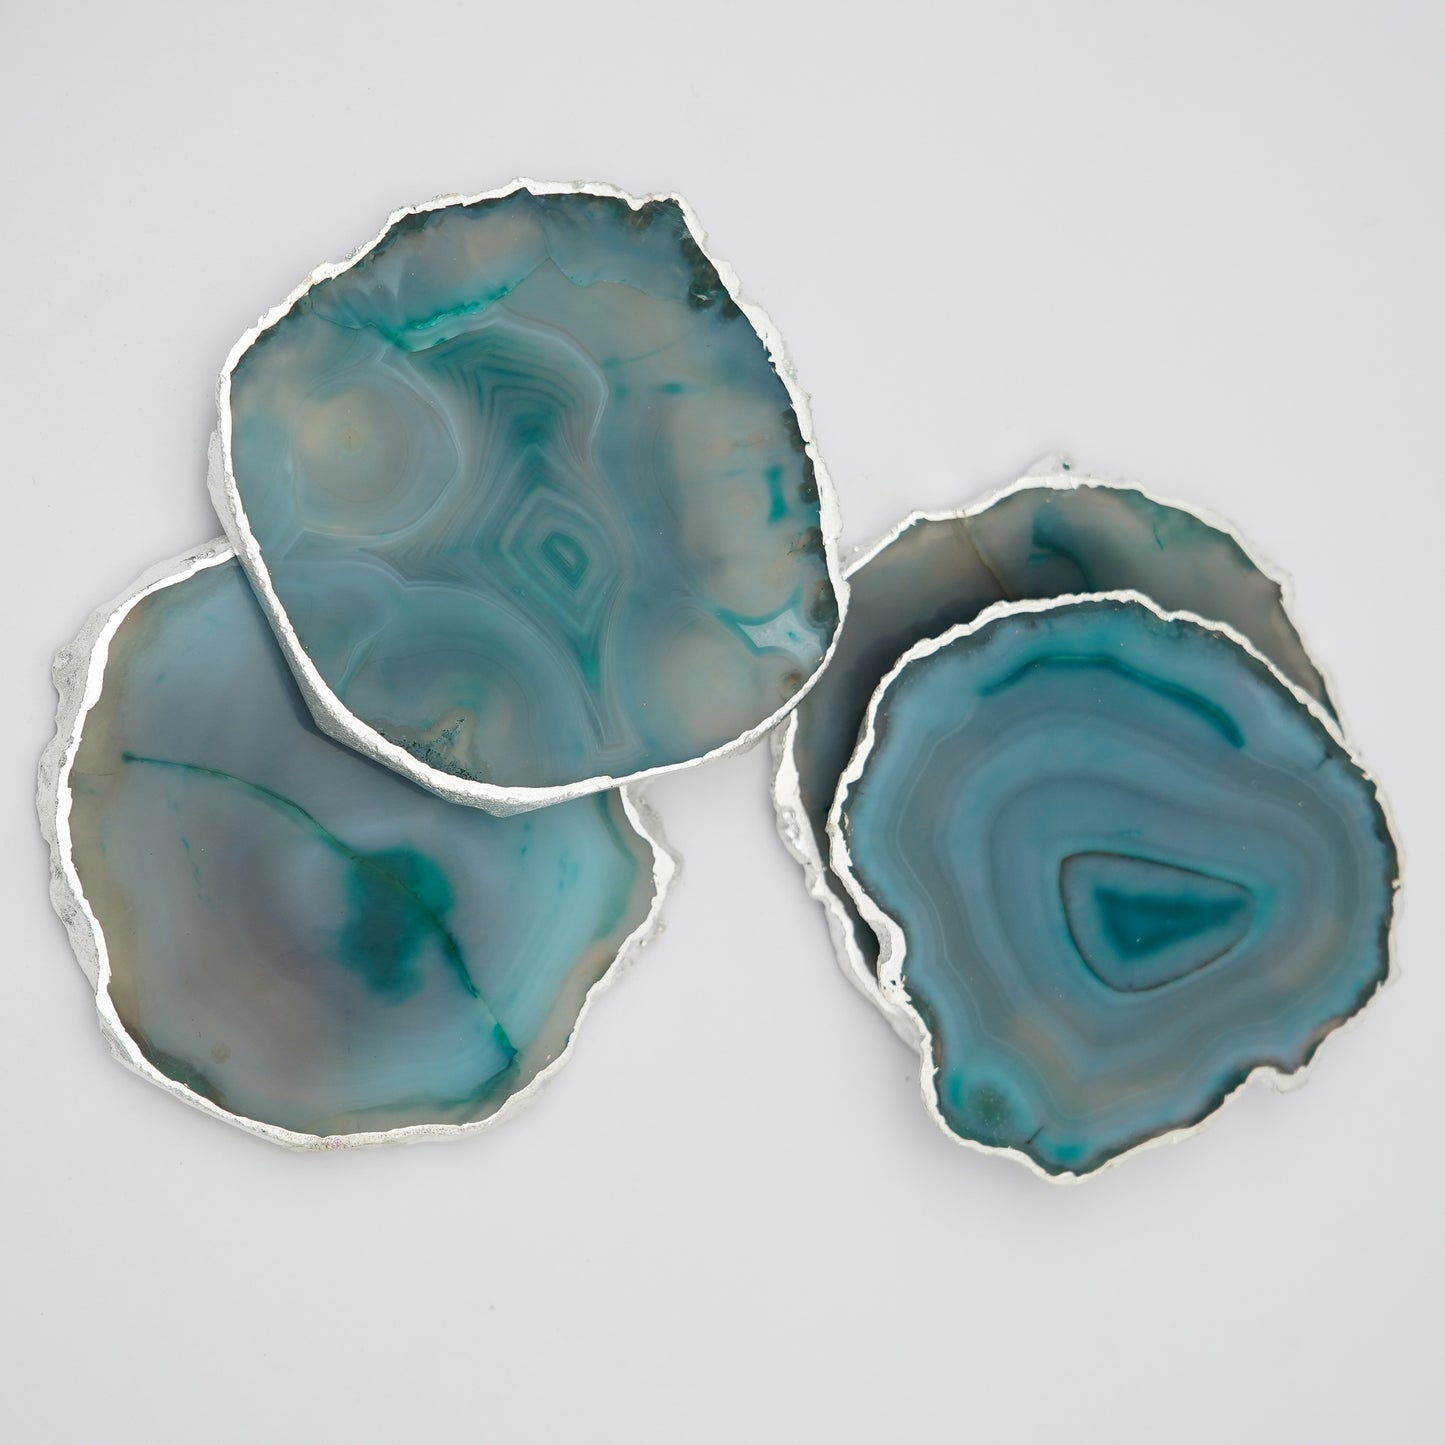 Brazilian Agate Stone Silver Plated Coaster Beautiful Coaster Fit for Tea Cups Coffee Mugs and Glasses Perfect Table Accessories Tableware Set of 4- Green